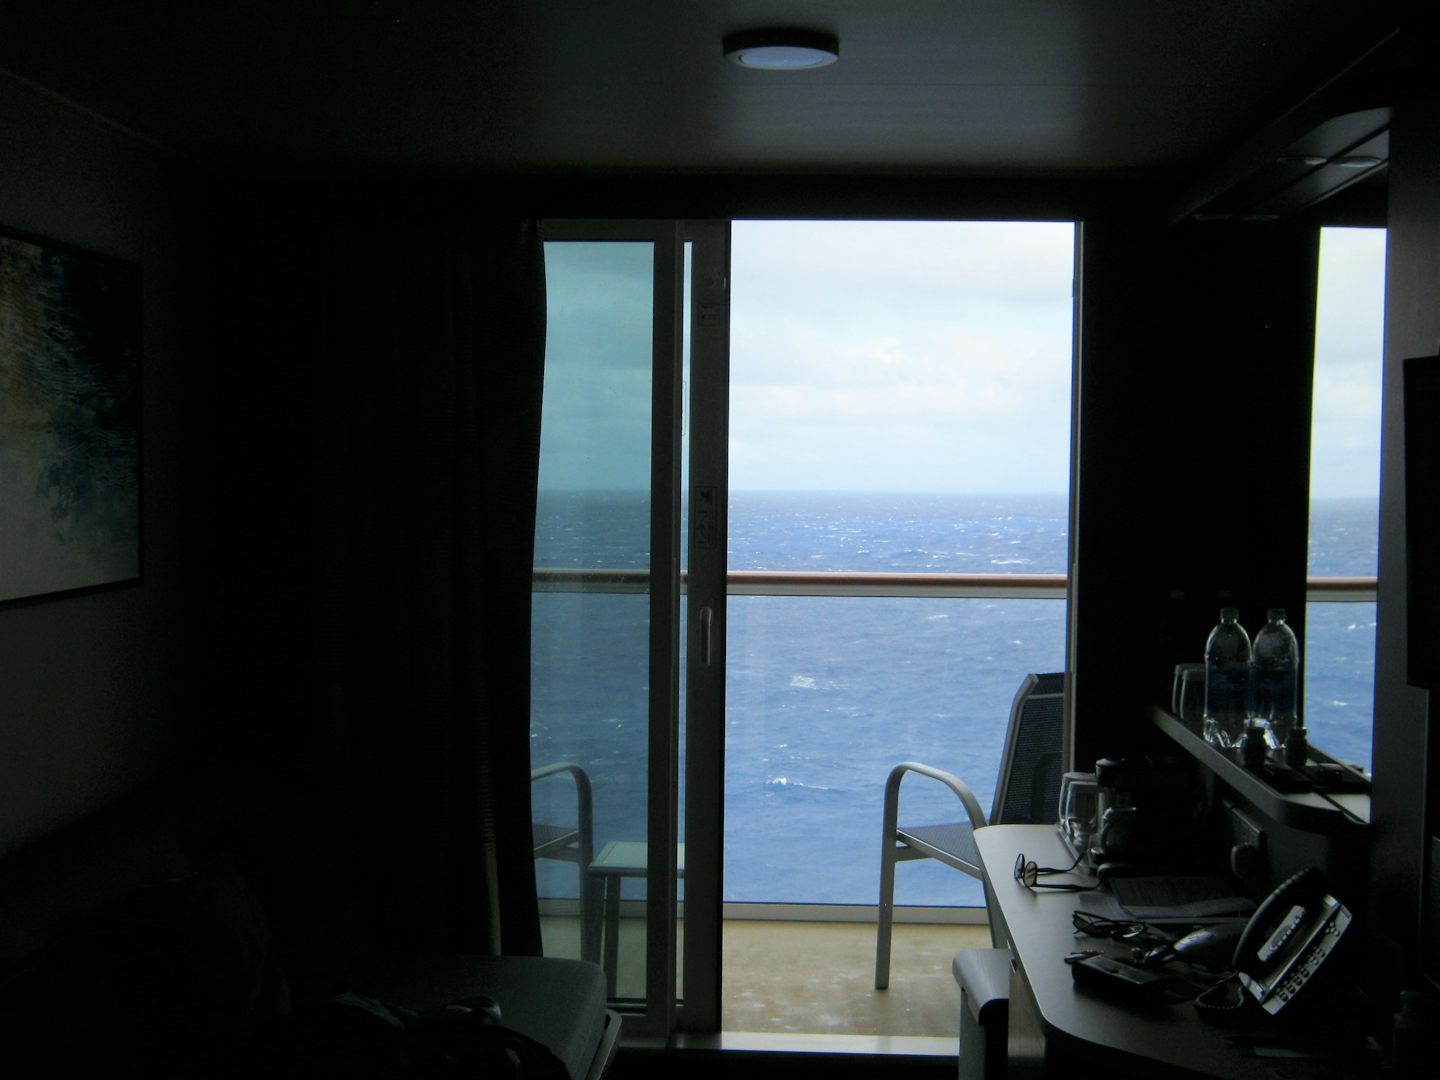 Balcony view out at sea.